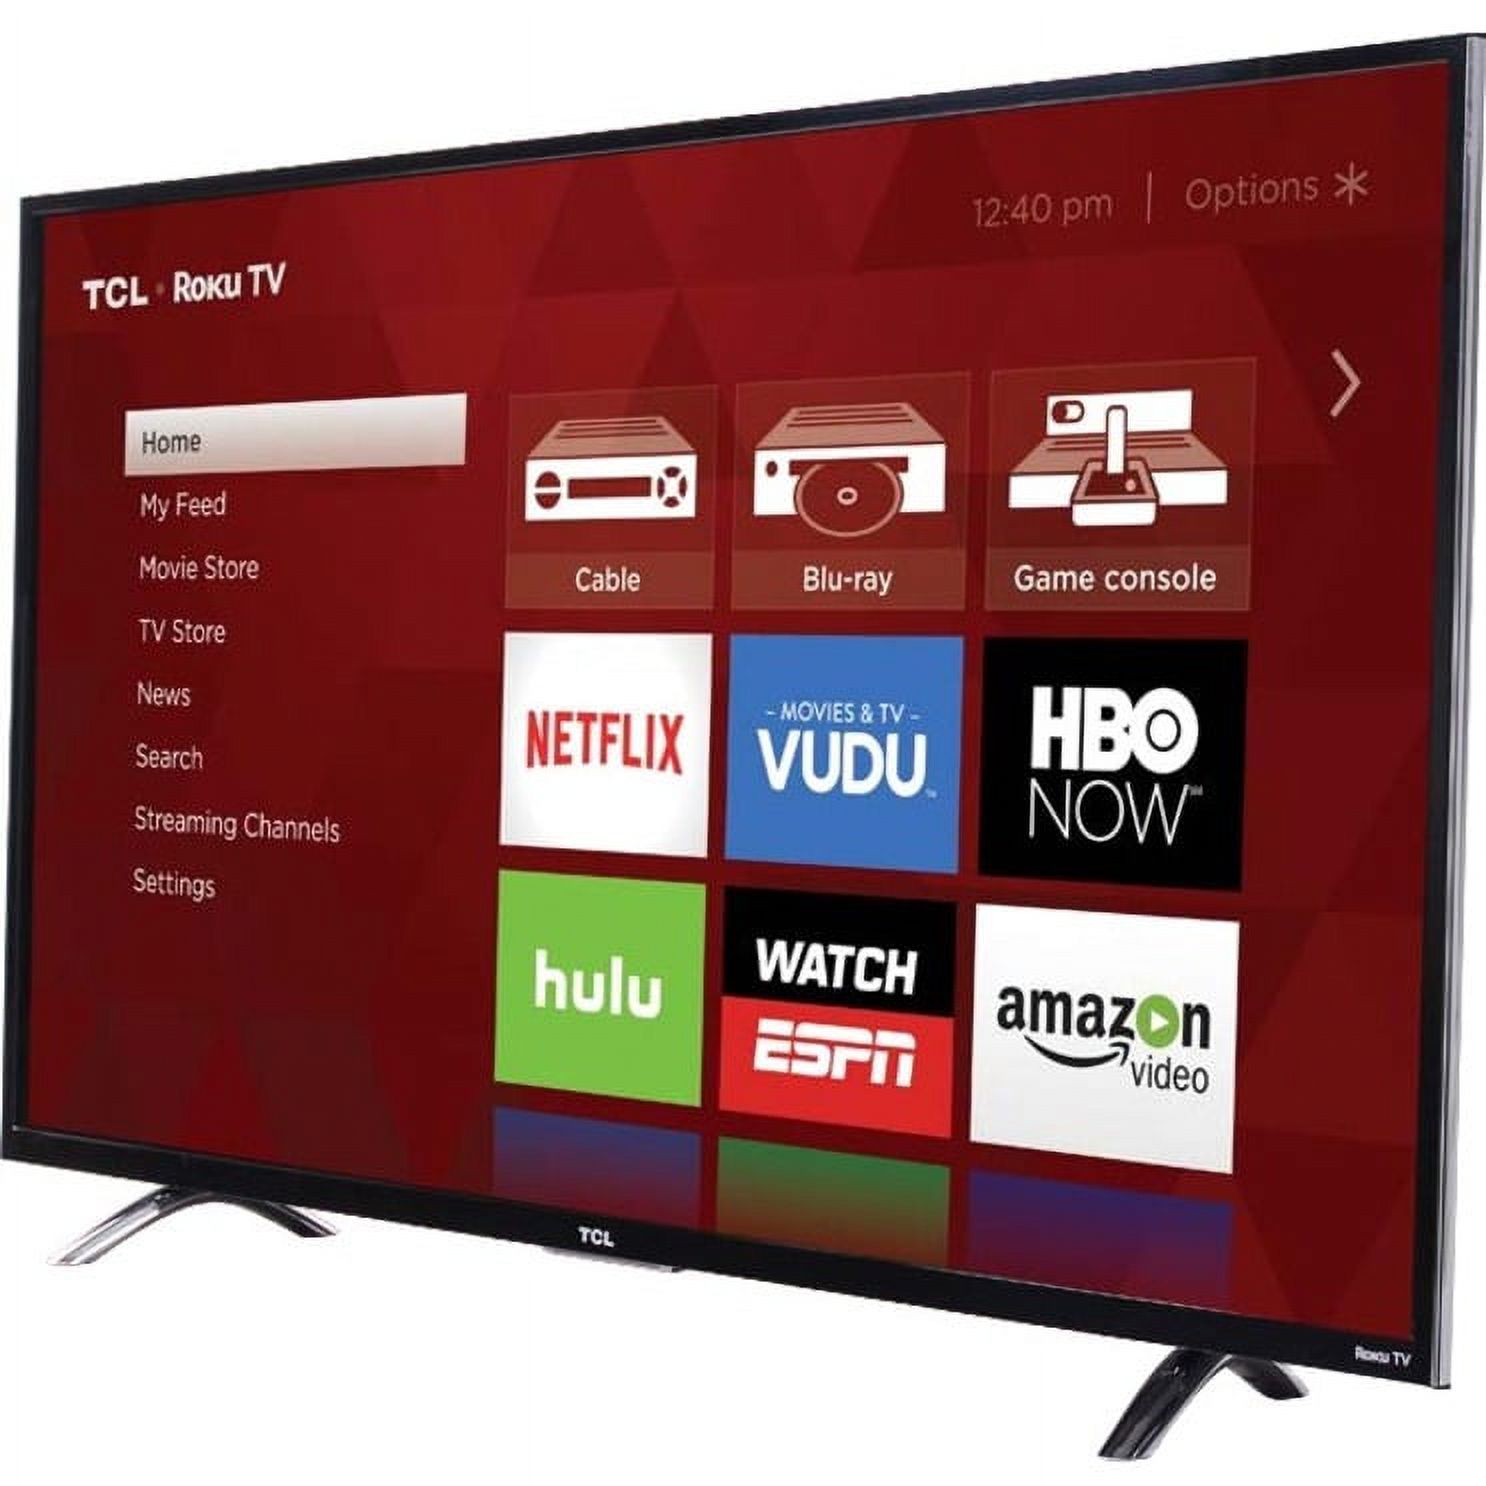 TCL 55" Class 4K UHDTV (2160p) Smart LED-LCD TV (55UP130) - image 1 of 6